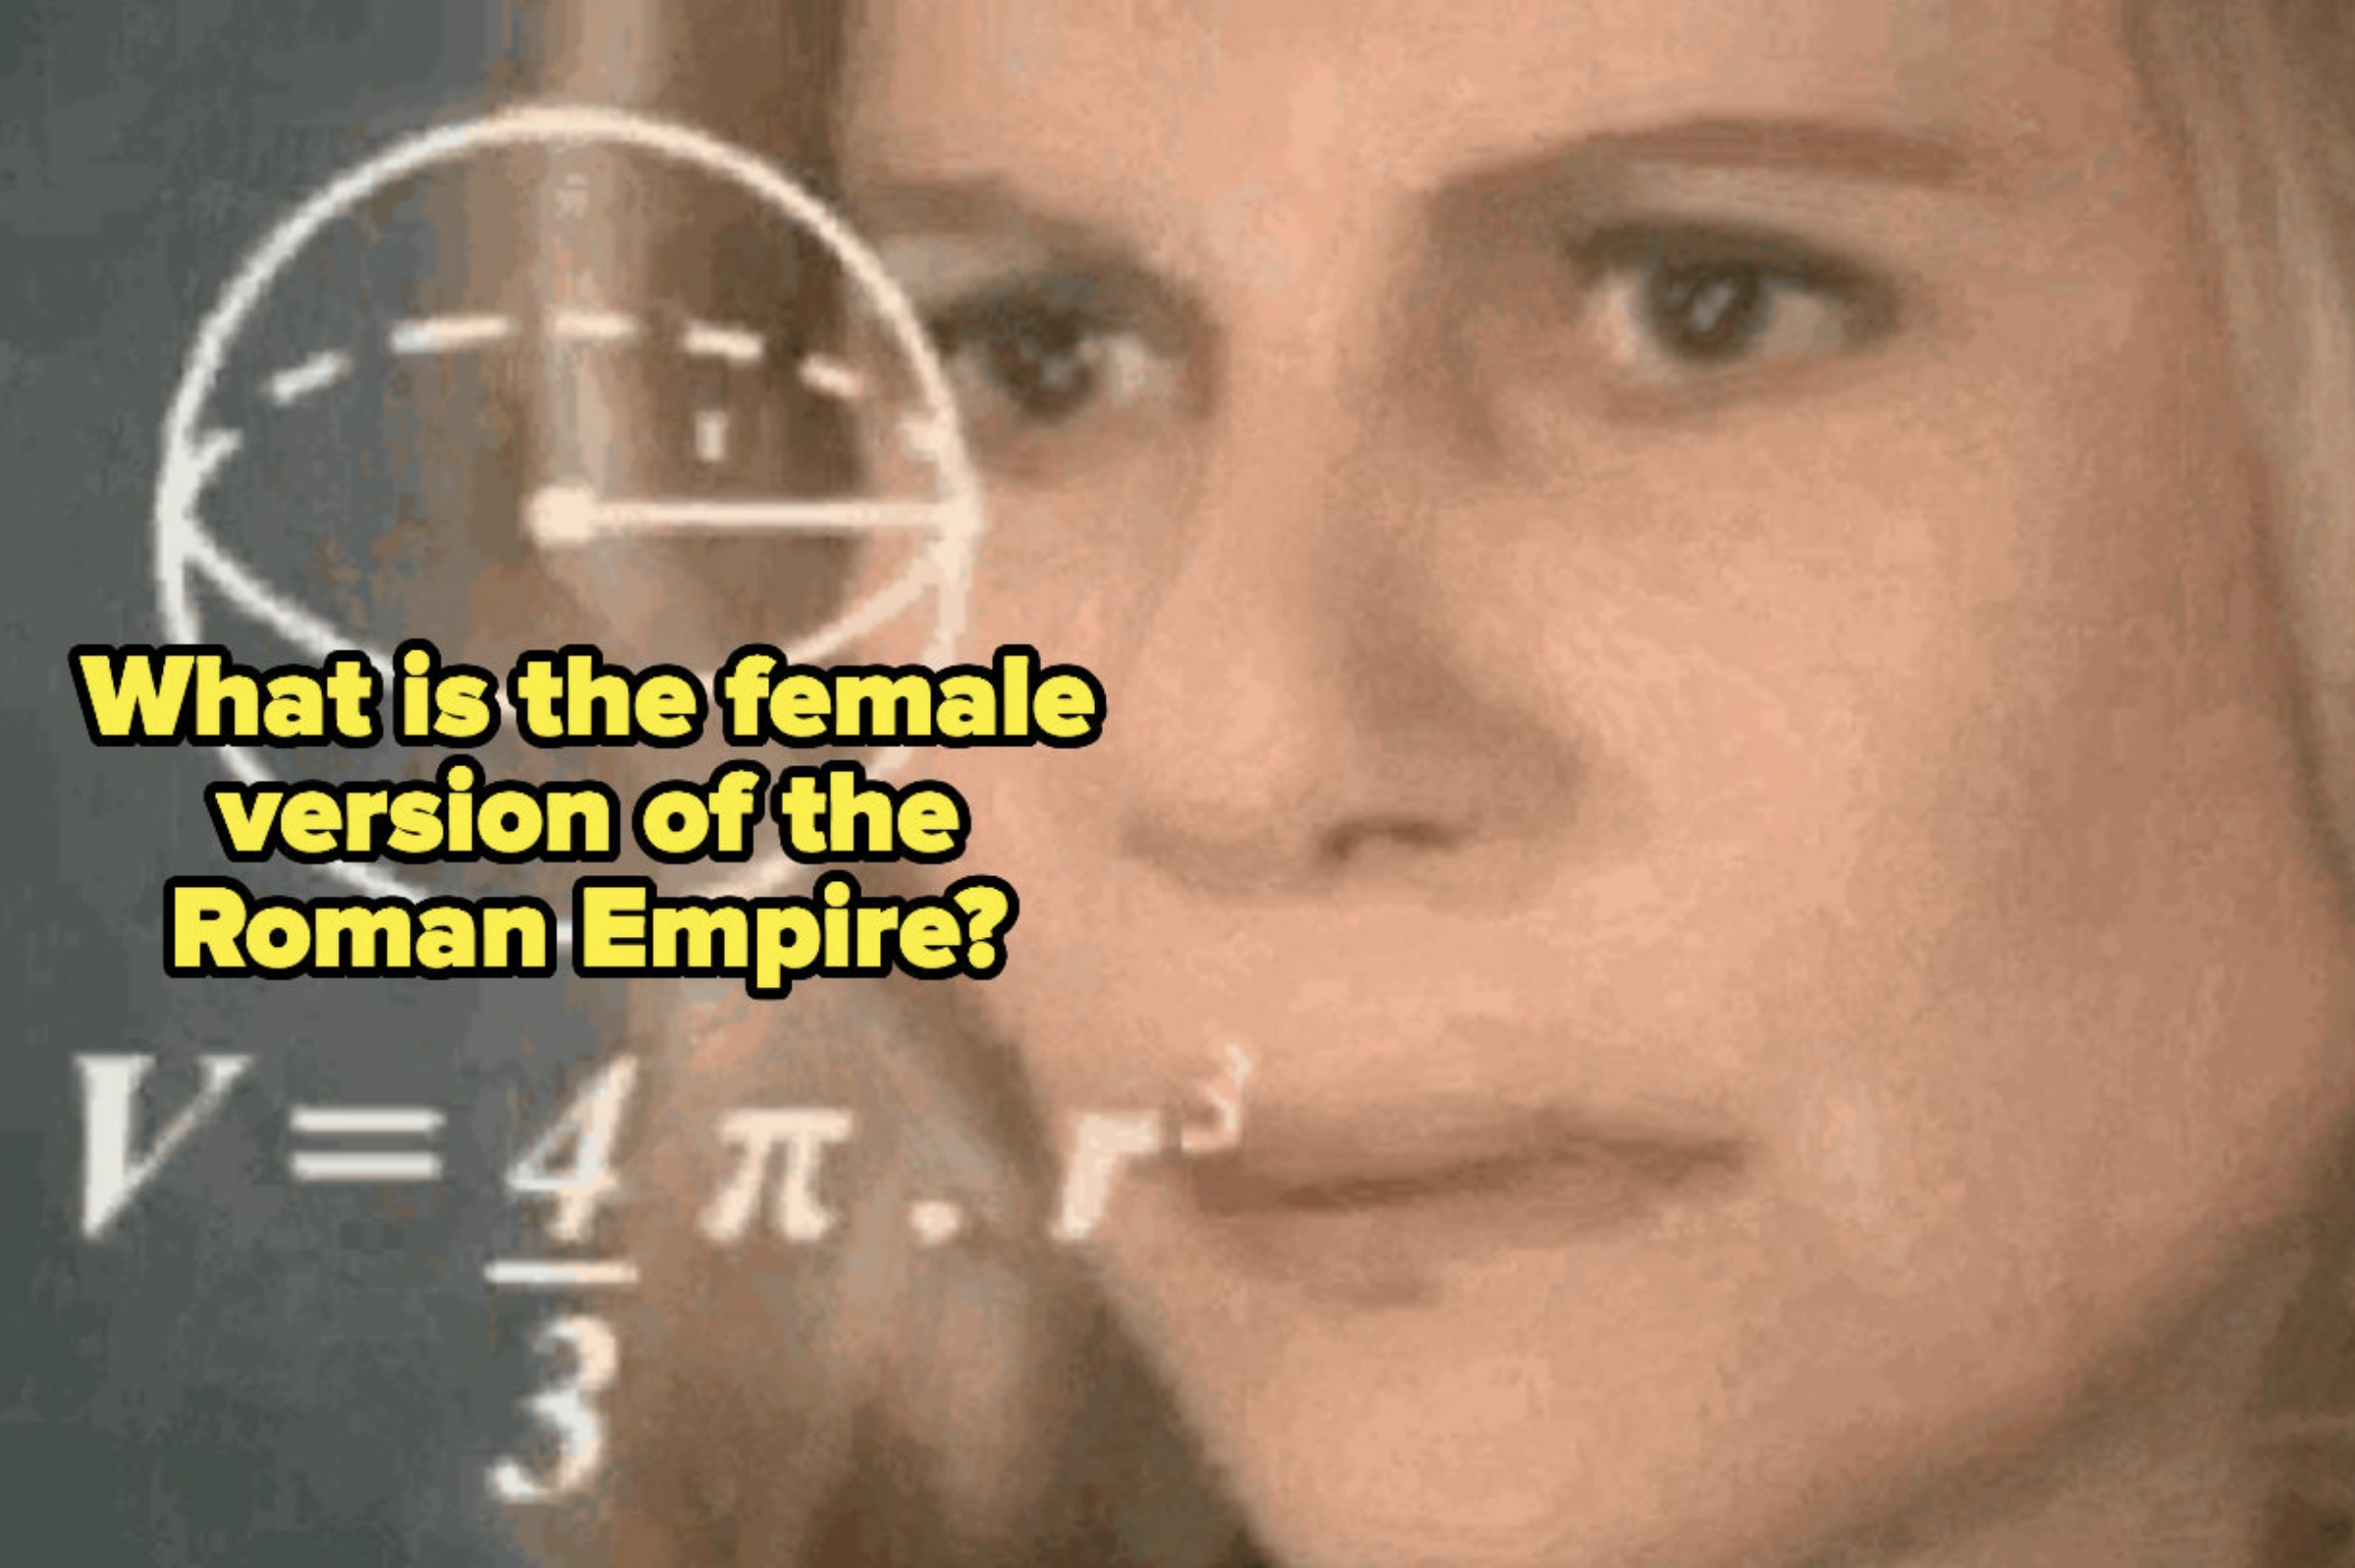 ladies,-tell-me-what-you-think-about-as-often-as-men-think-about-the-roman-empire